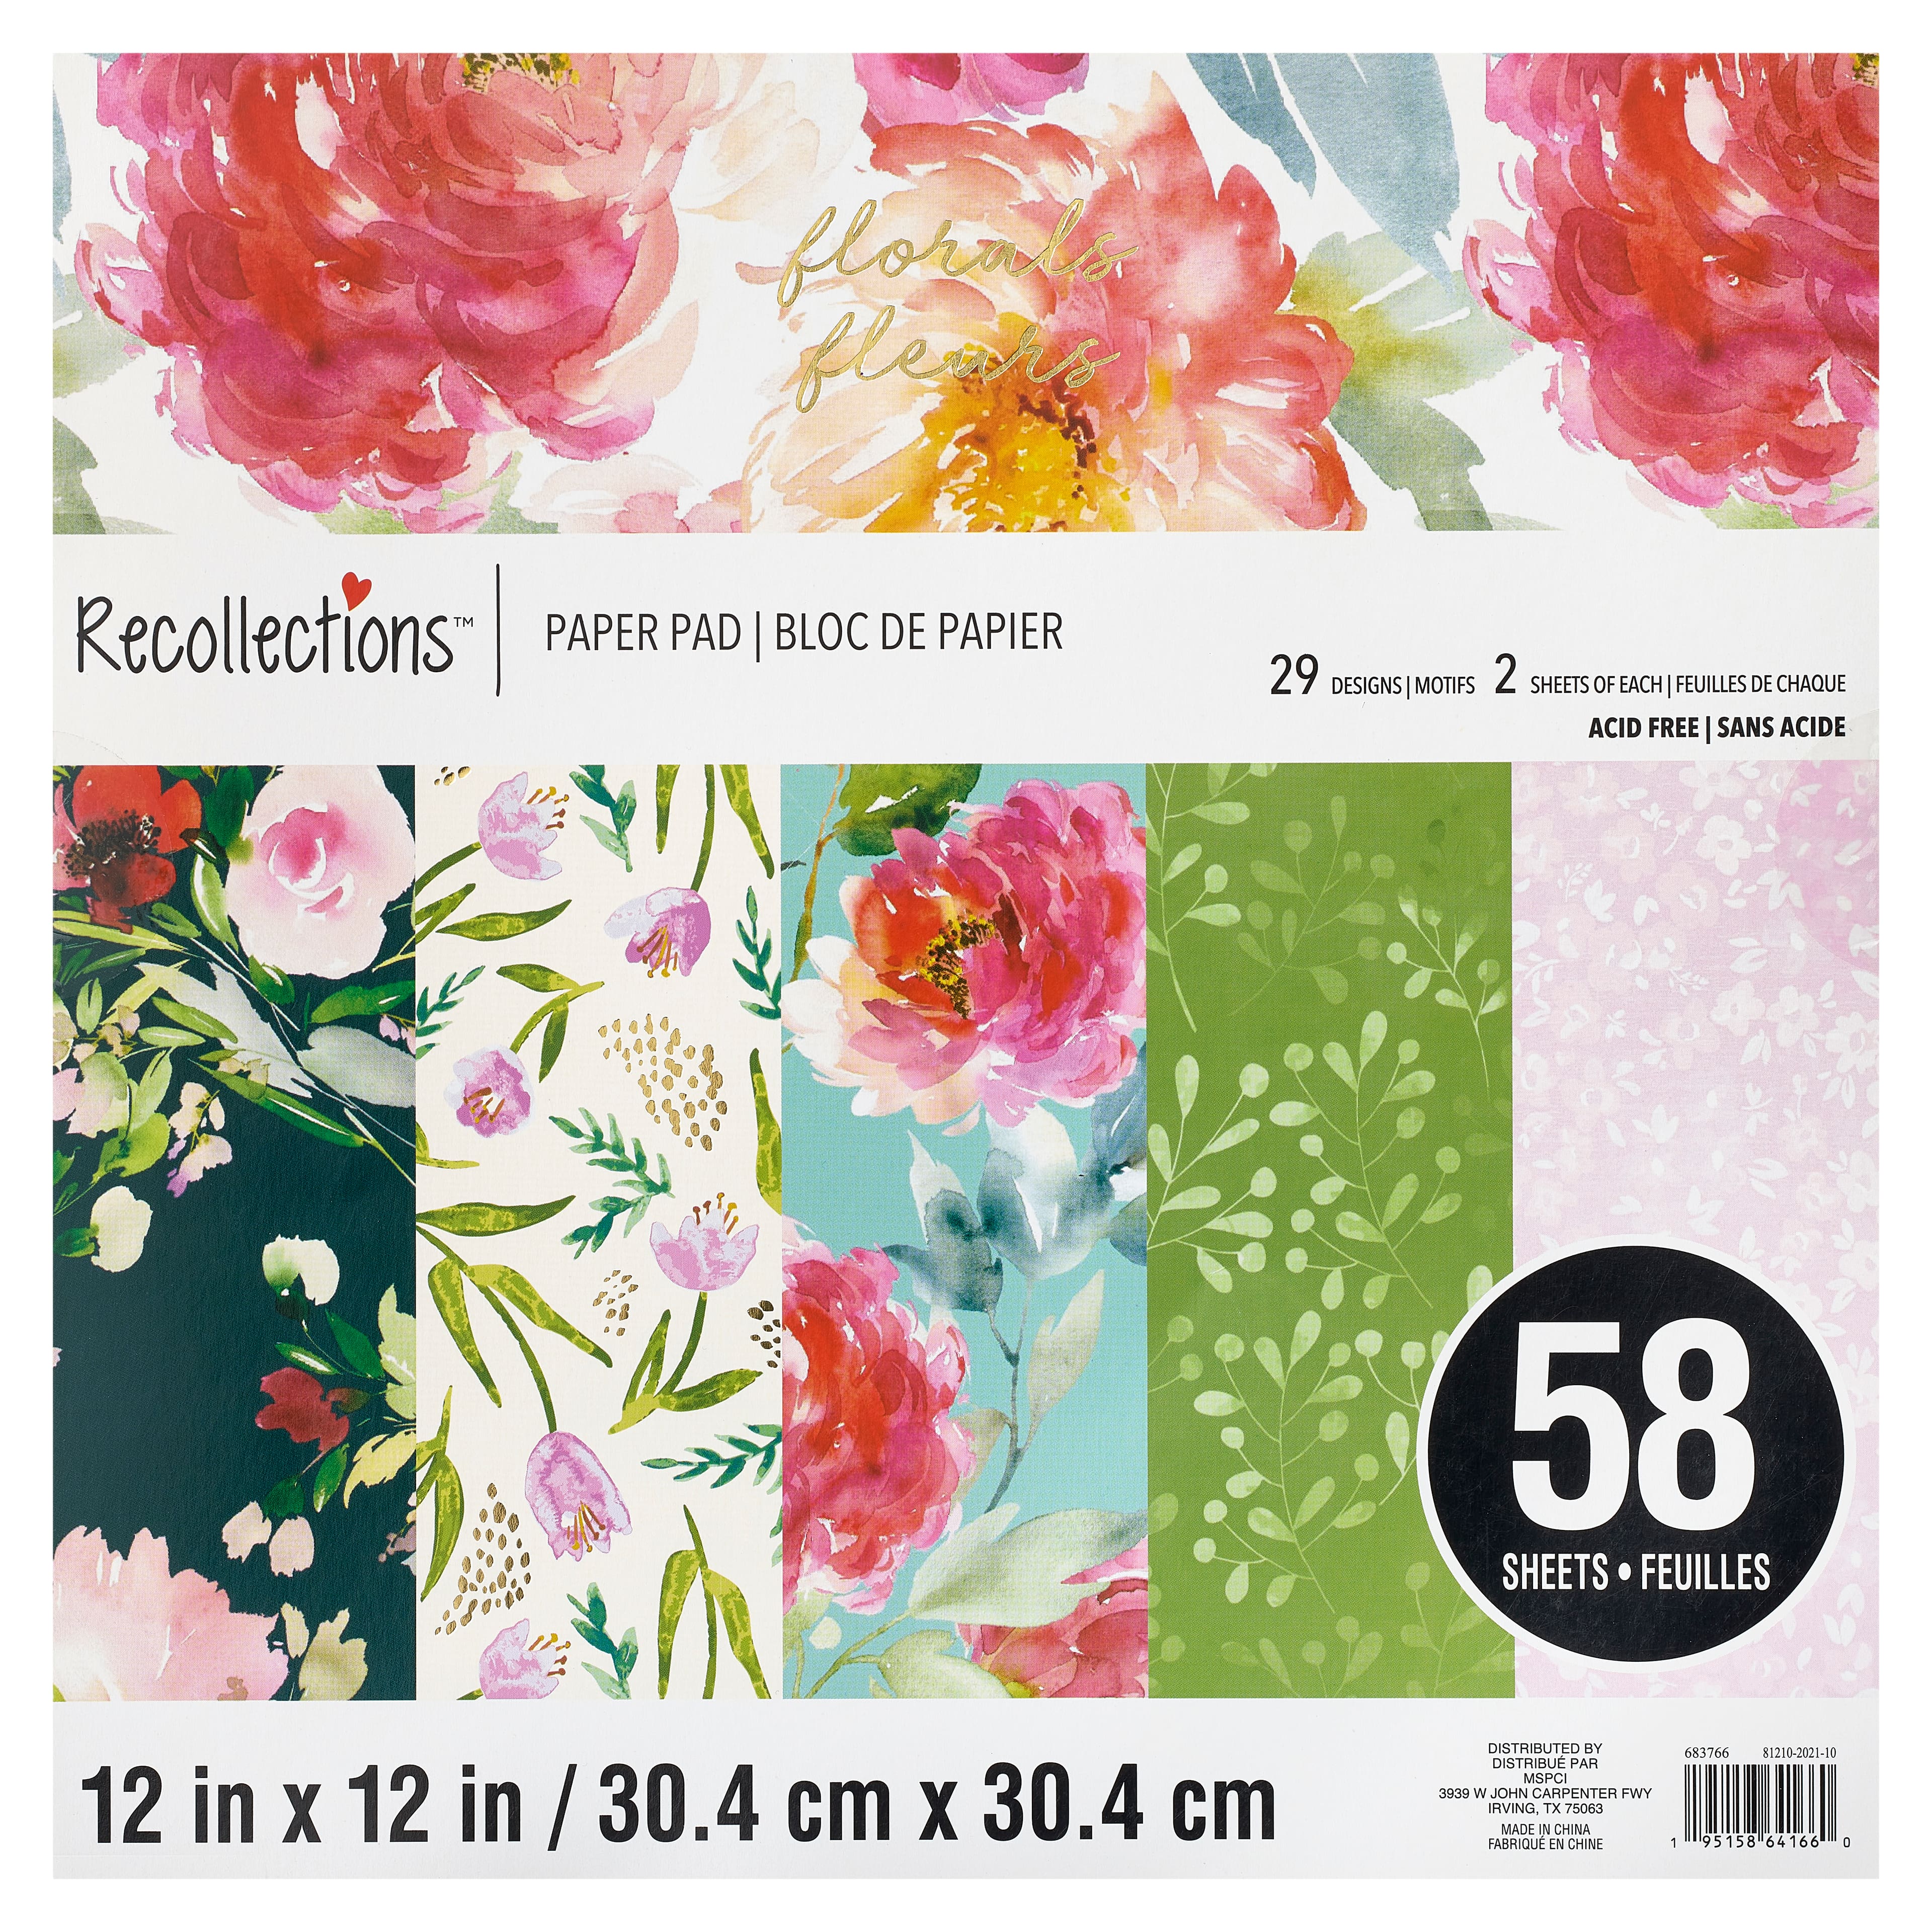 12 Packs: 12 ct. (144 total) Red Paper Roses by Recollections™ 